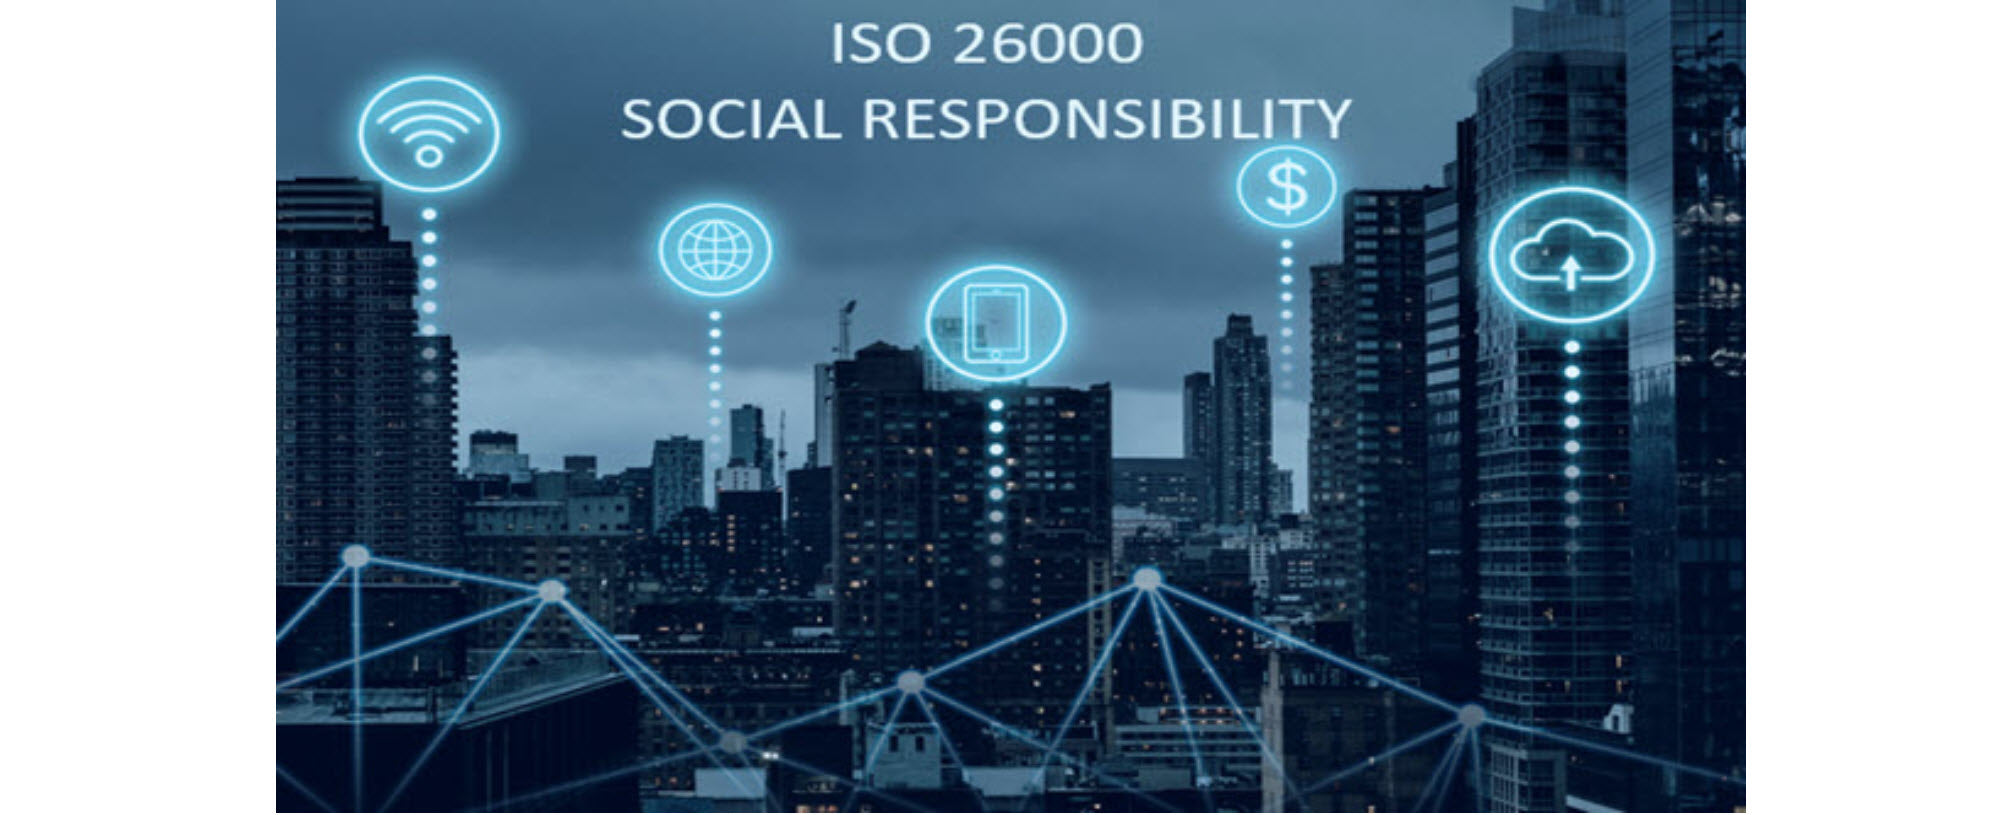 Transitorio Hito Sandalias ISO 26000 Social Responsibility – ISO Templates and Documents Download